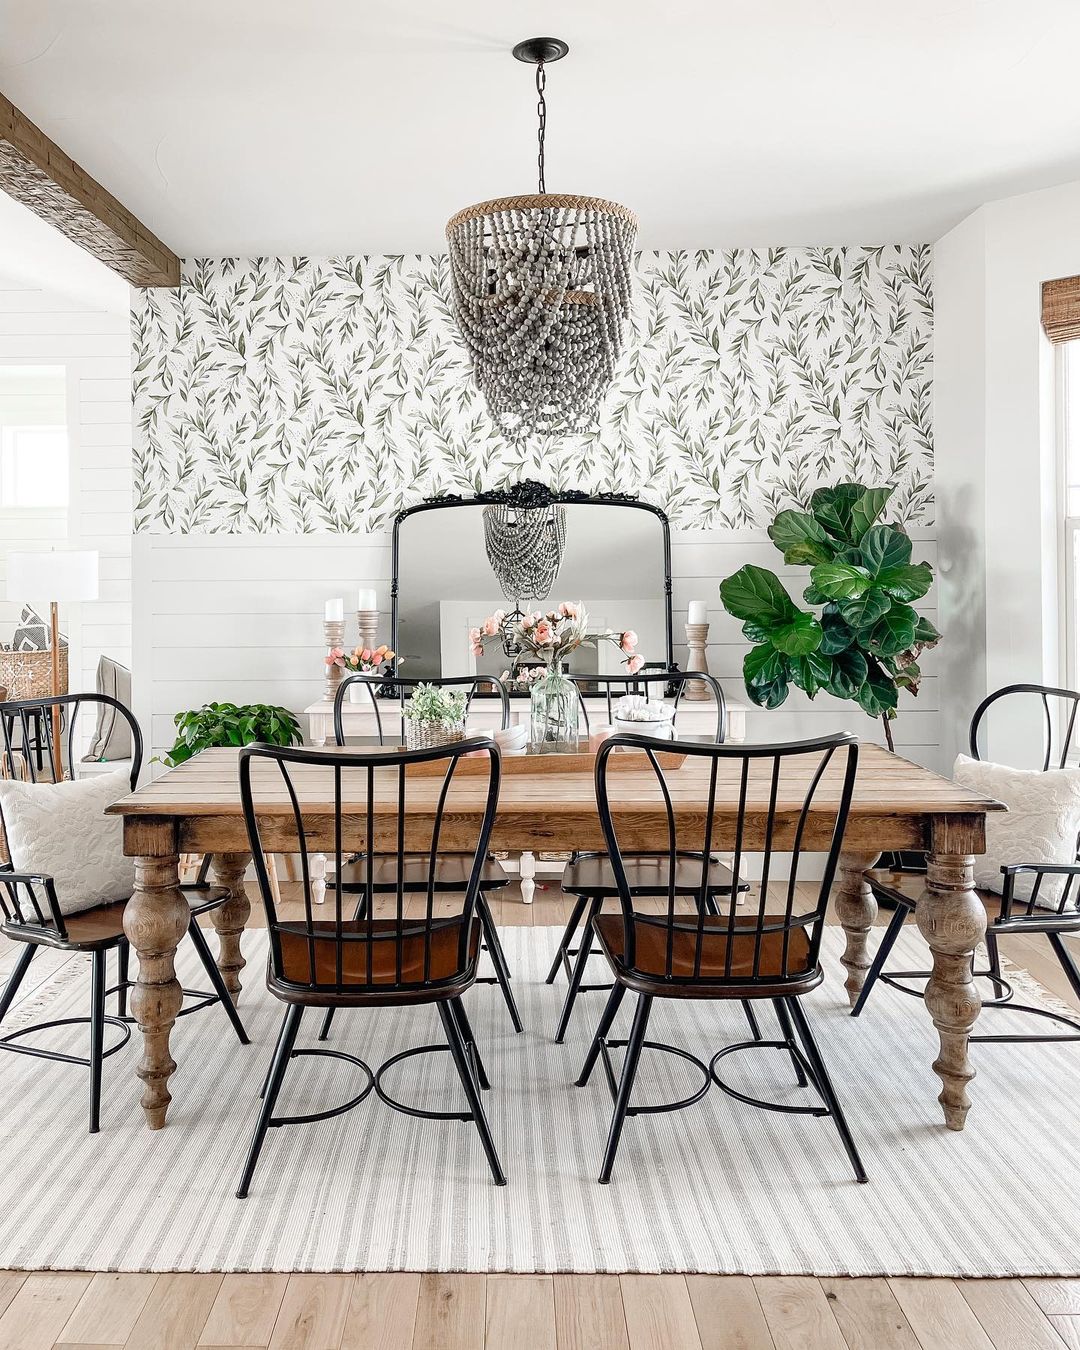 Dining Room with Farmhouse Style Wallpaper Applied. Photo by Instagram user @sarahjoyblog